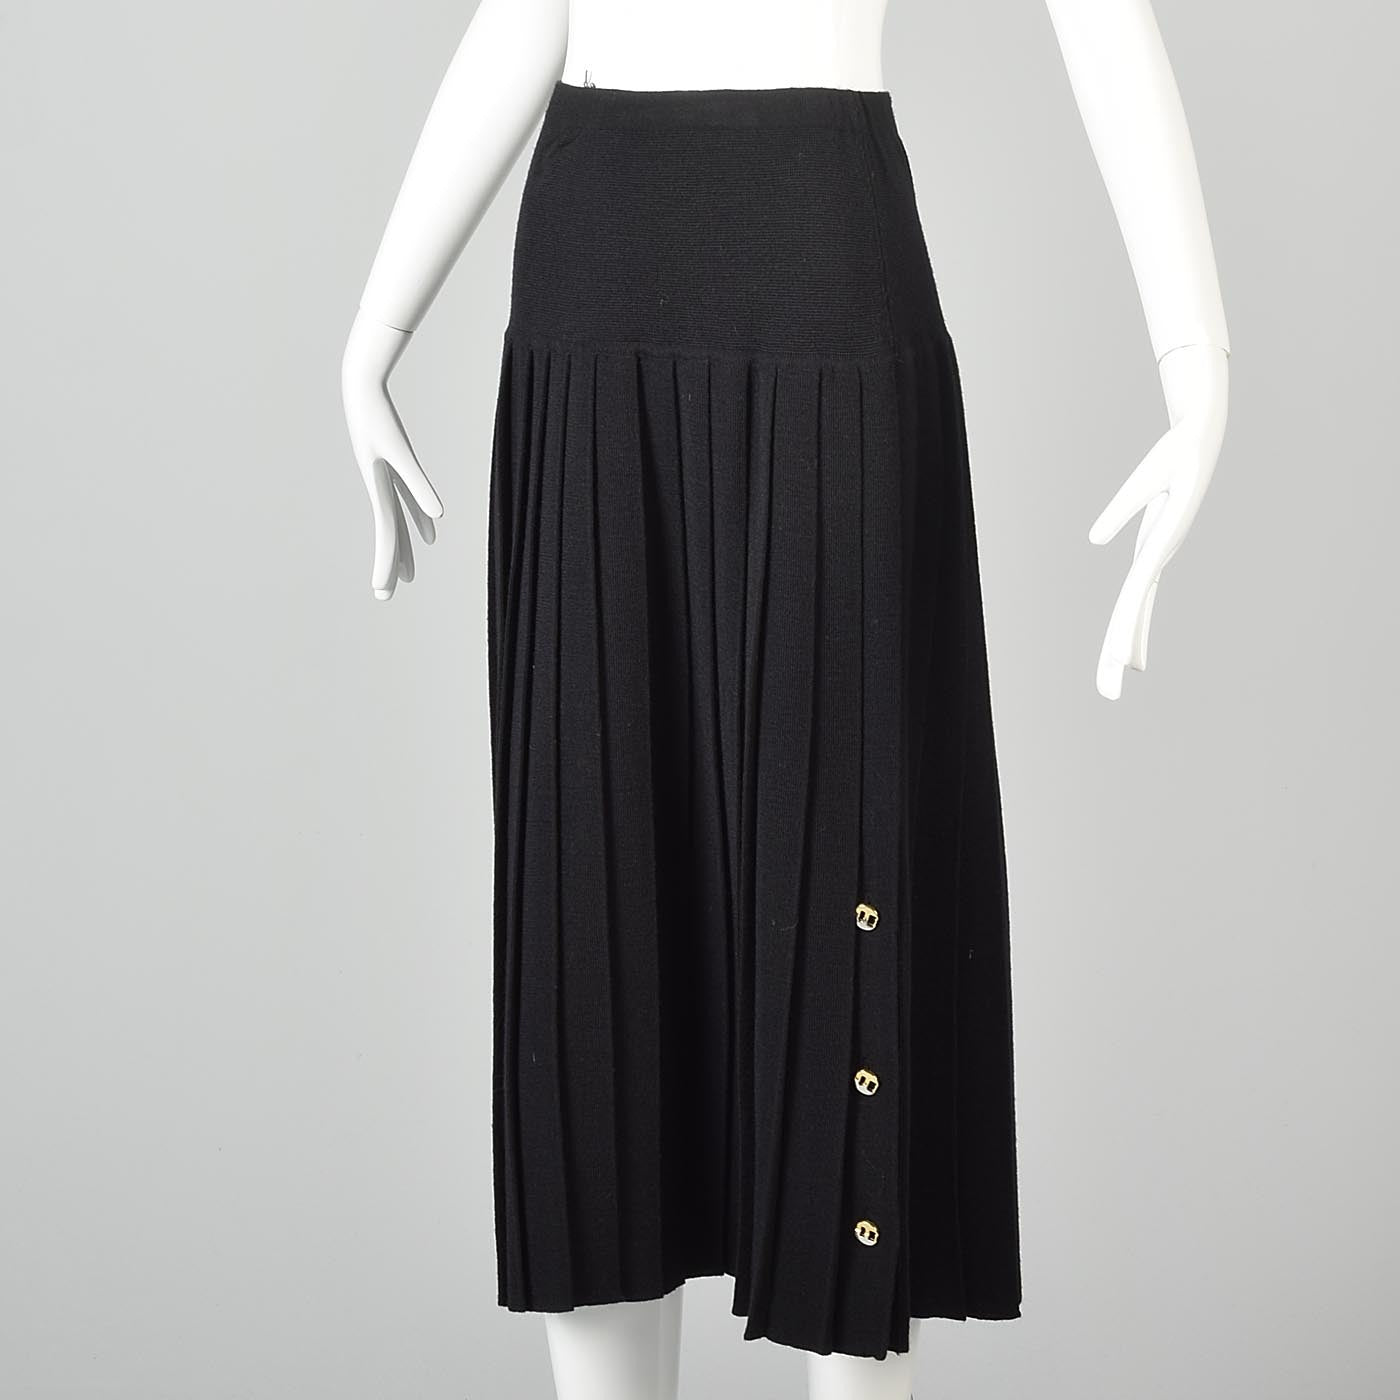 1990s Ferragamo Black Knit Skirt with Logo Buttons